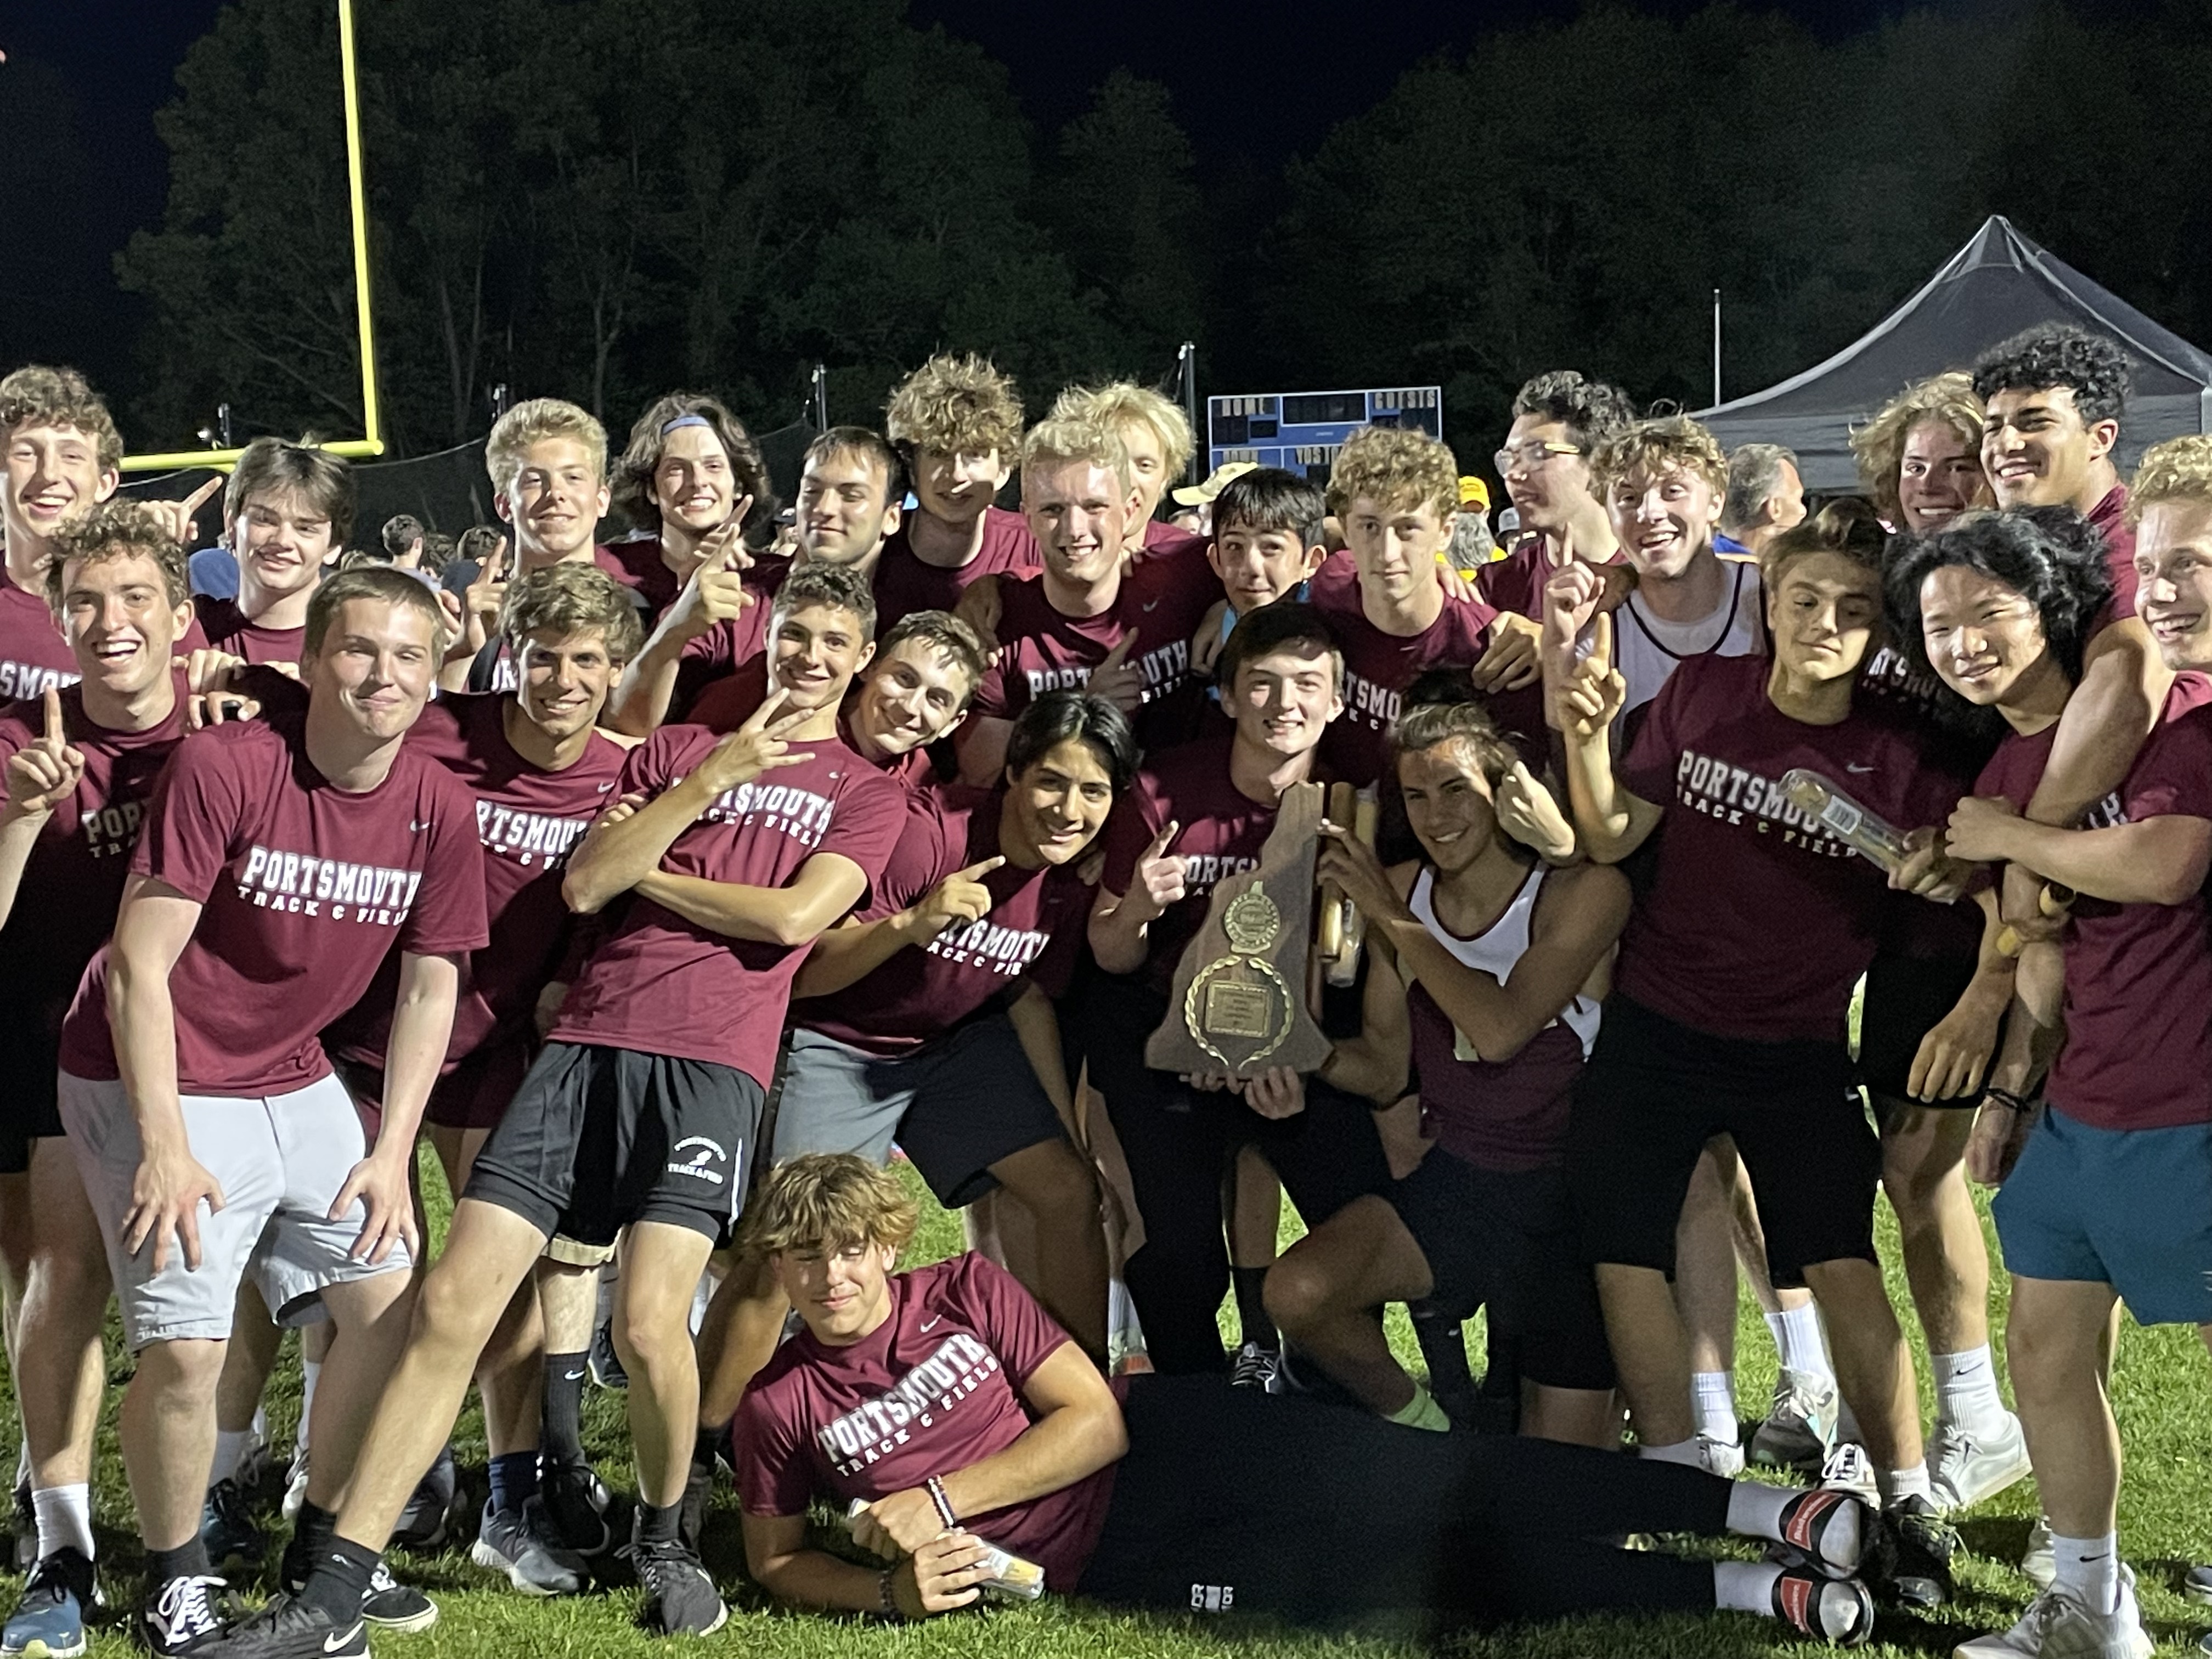 2022 DI BOYS OUTDOOR TRACK STATE CHAMPIONS